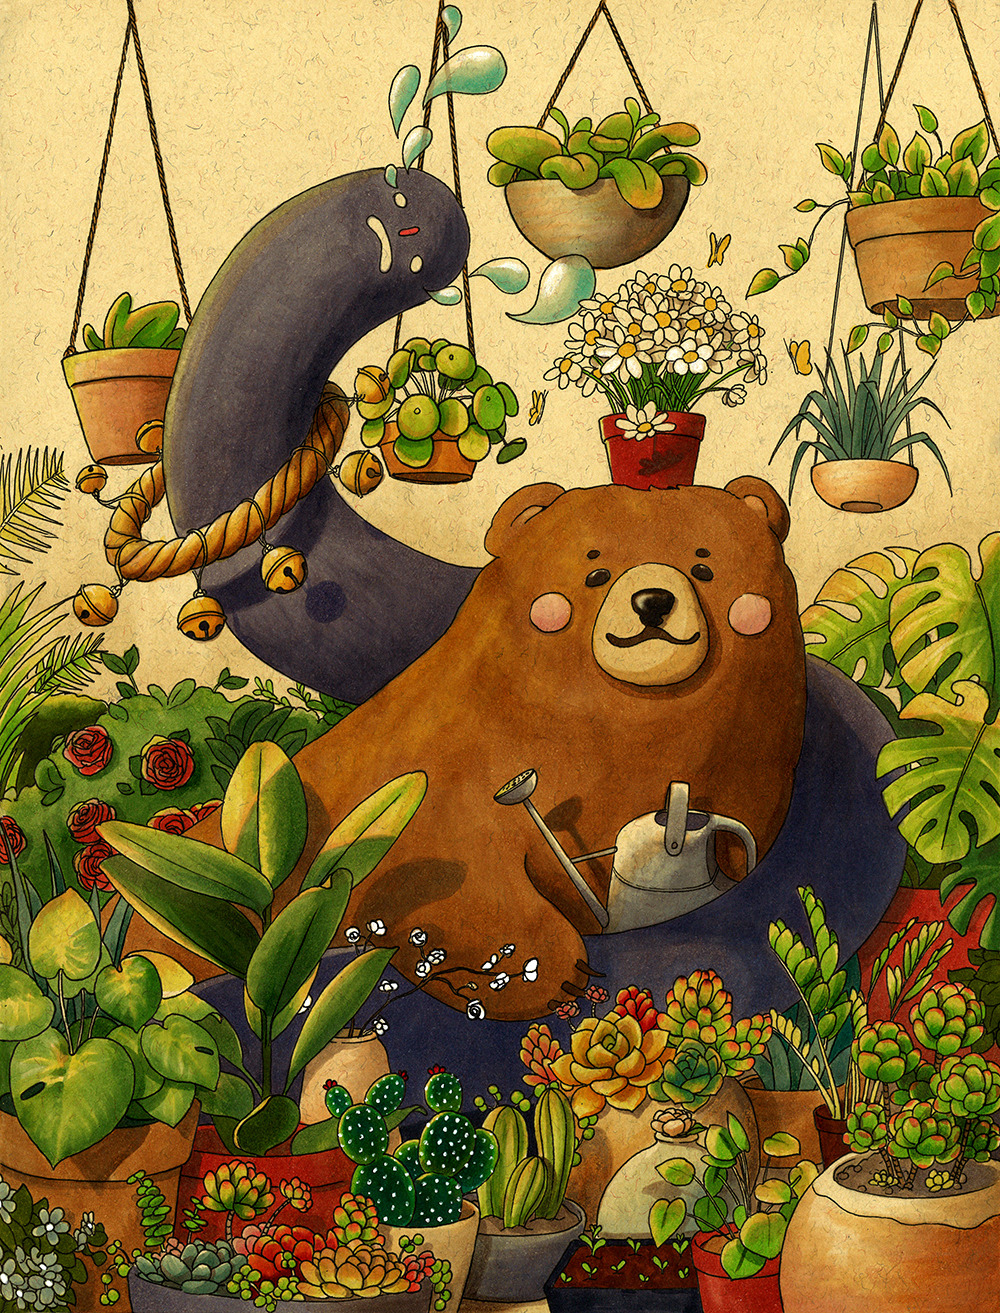 Garden bear! Sketchbook | Instagram — EatSleepDraw is working on something new and we want you to be the first to know about it. Make sure you’re on our email list.